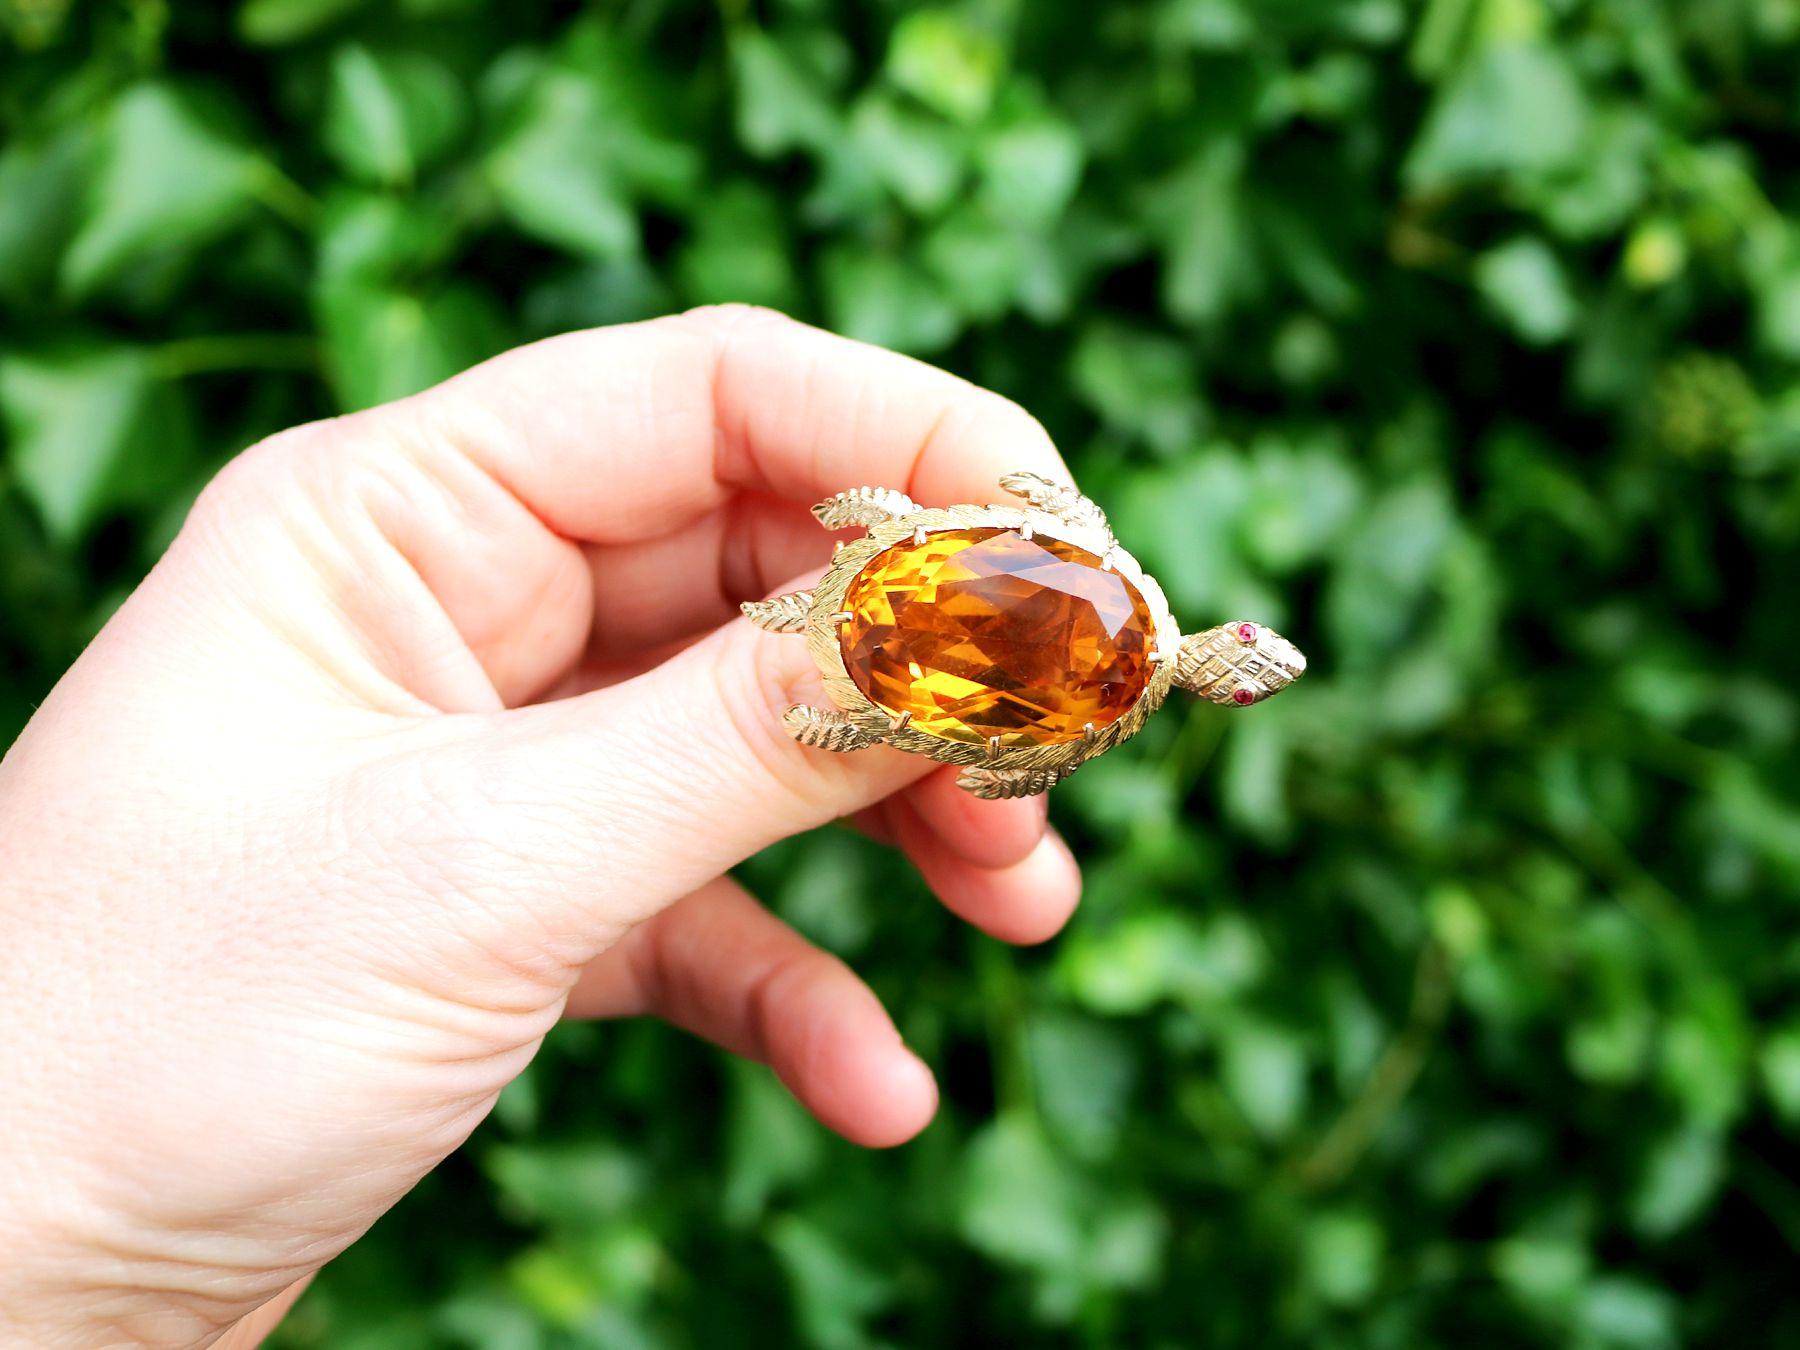 A stunning vintage French 38.65 carat citrine and ruby, 18 karat yellow gold 'turtle' brooch; part of our diverse gemstone jewelry and estate jewelry collections.

This stunning, fine and impressive vintage oval cut turtle brooch has been crafted in